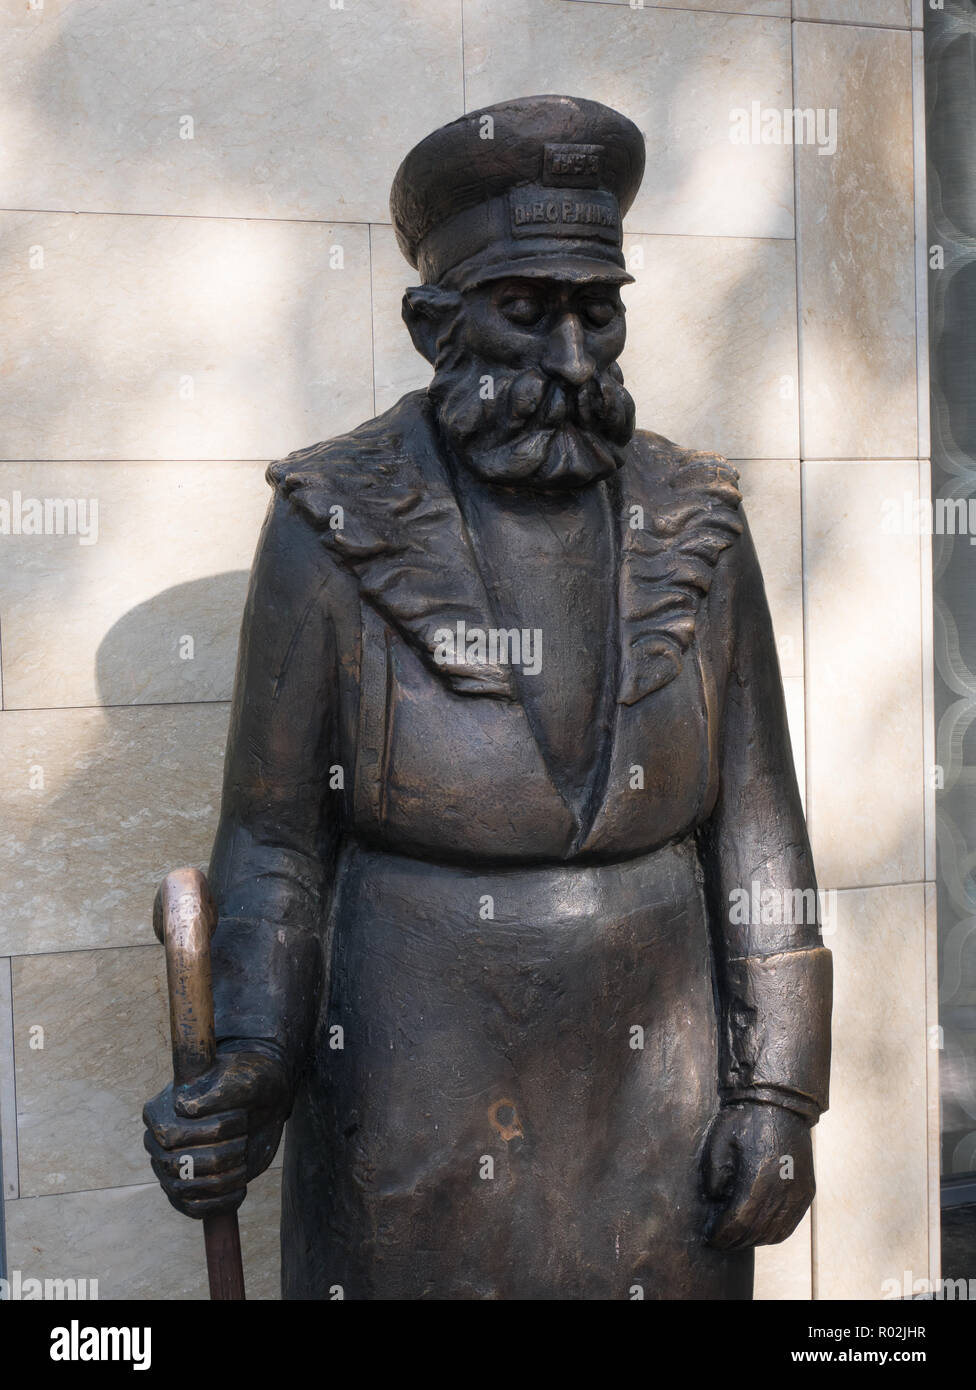 Bronze statue based on The Janitor by Niko Pirosmani, a famous Georgian  painter, located in Tbilisi, Georgia Stock Photo - Alamy